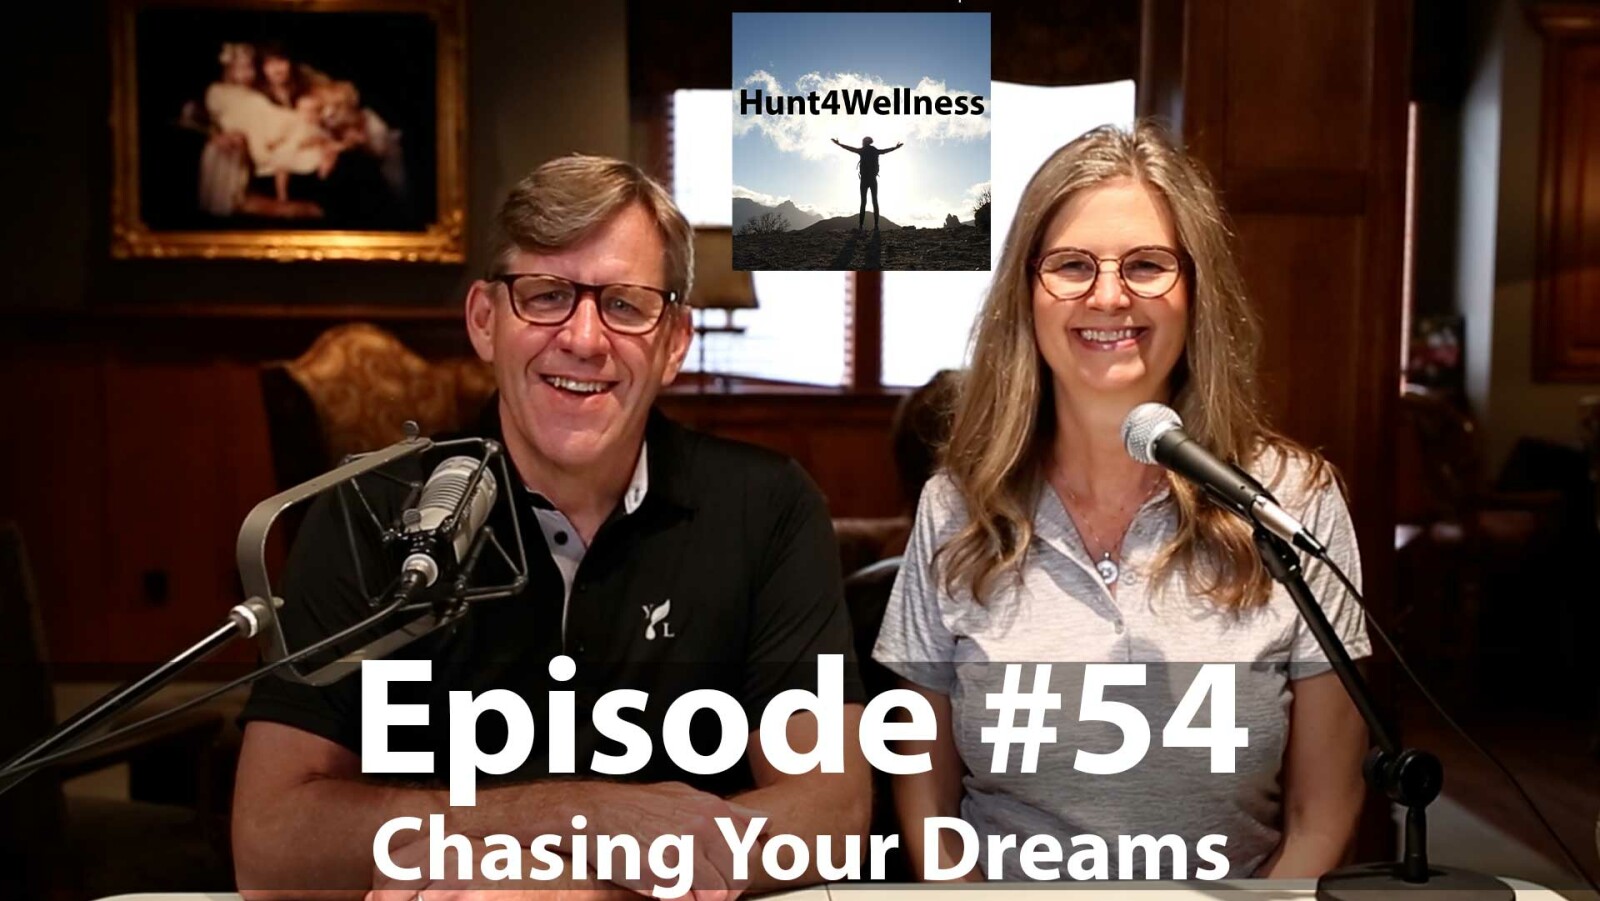 Episode #54 - Chasing Your Dreams